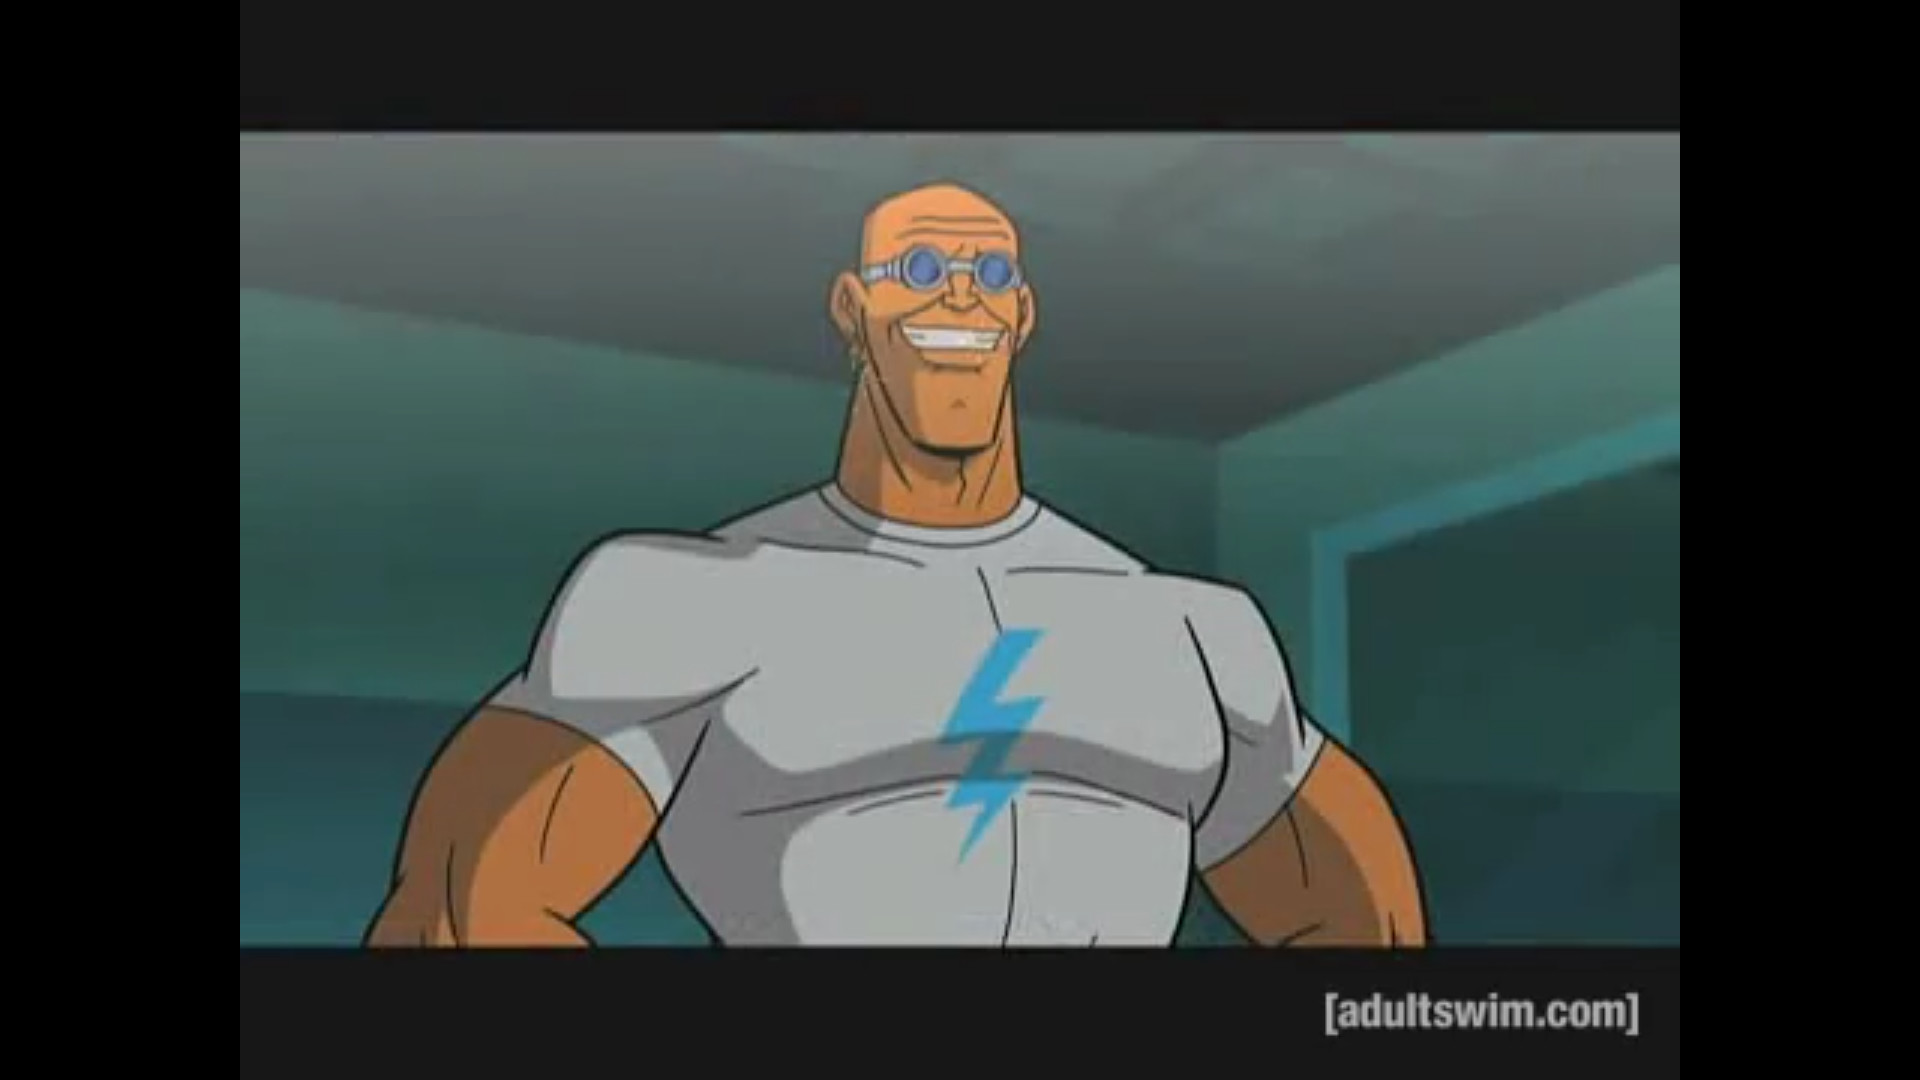 1920x1080 The Cleaner is a minor character on The Venture Bros.